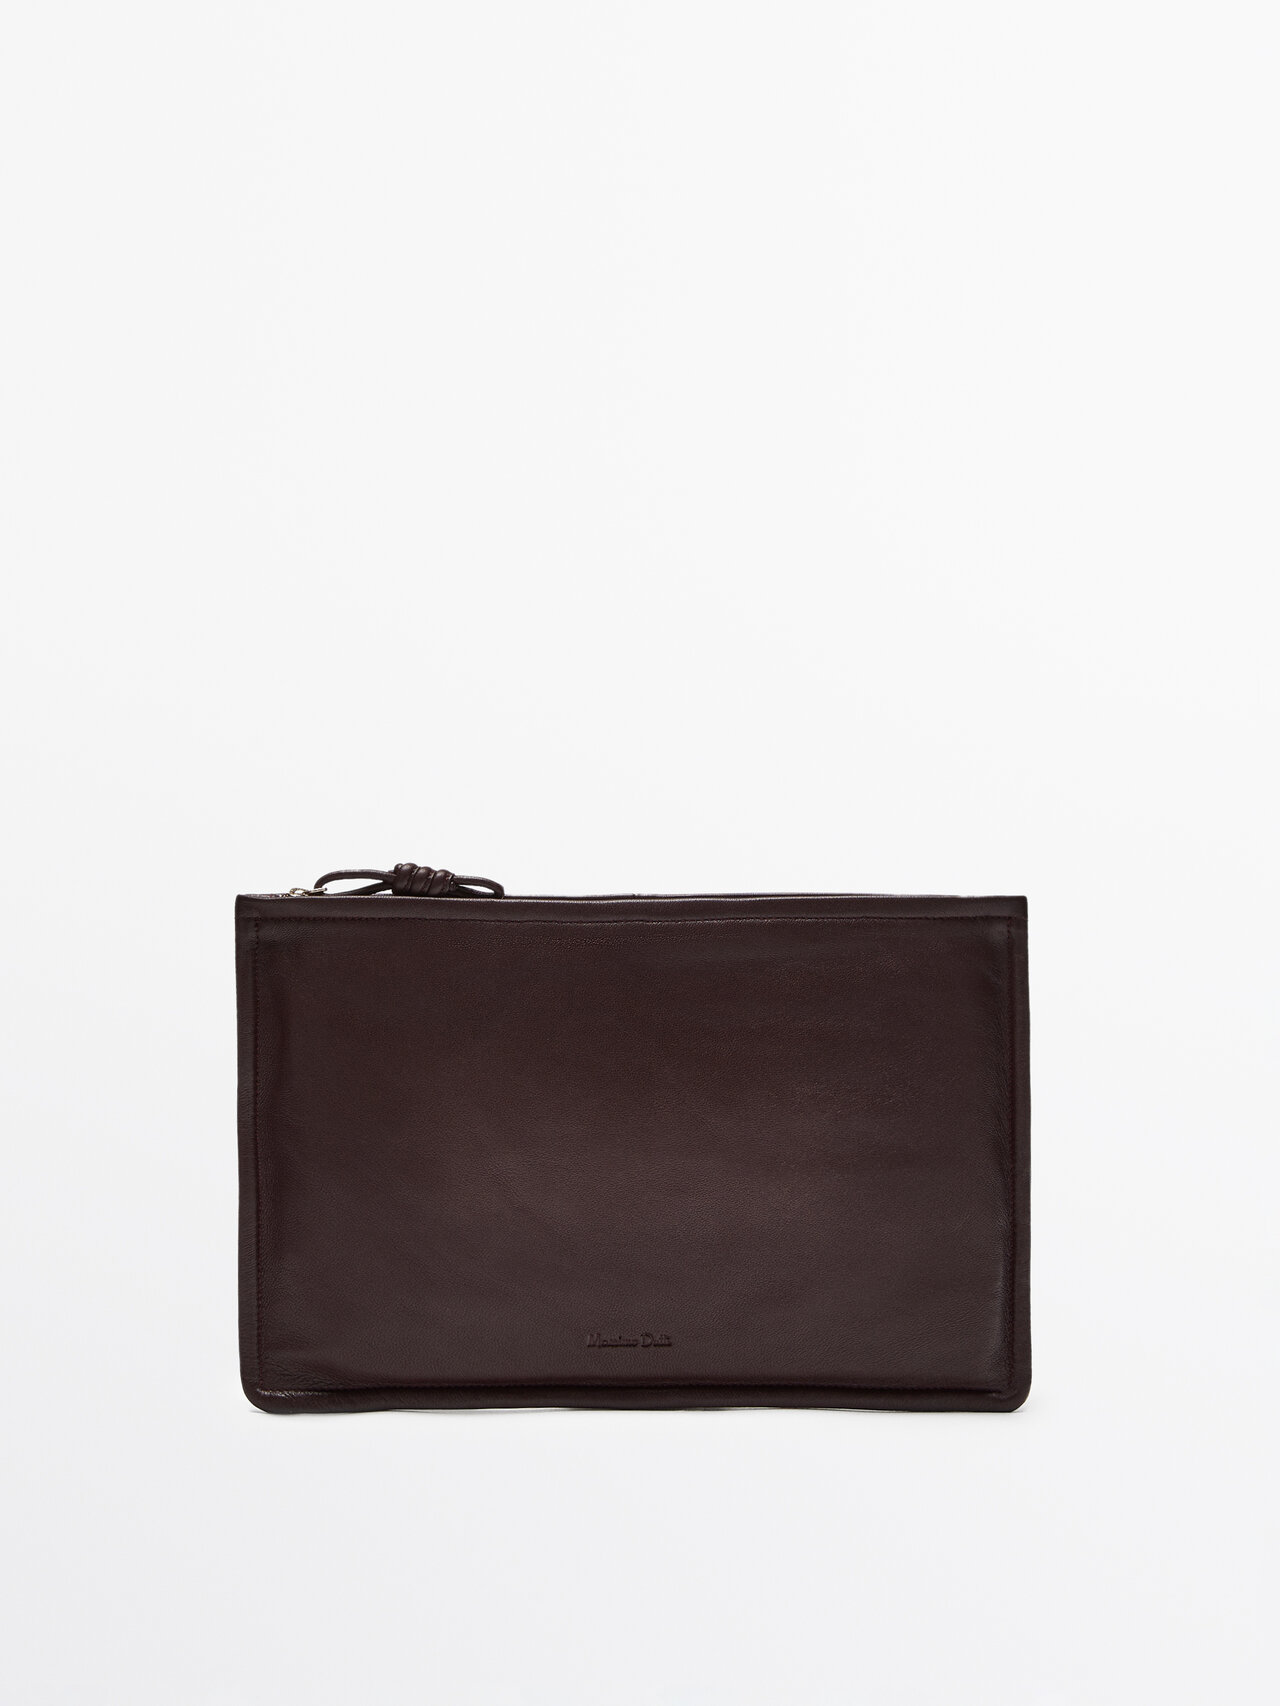 Massimo Dutti Nappa Leather Clutch With Knot Detail In Burgundy